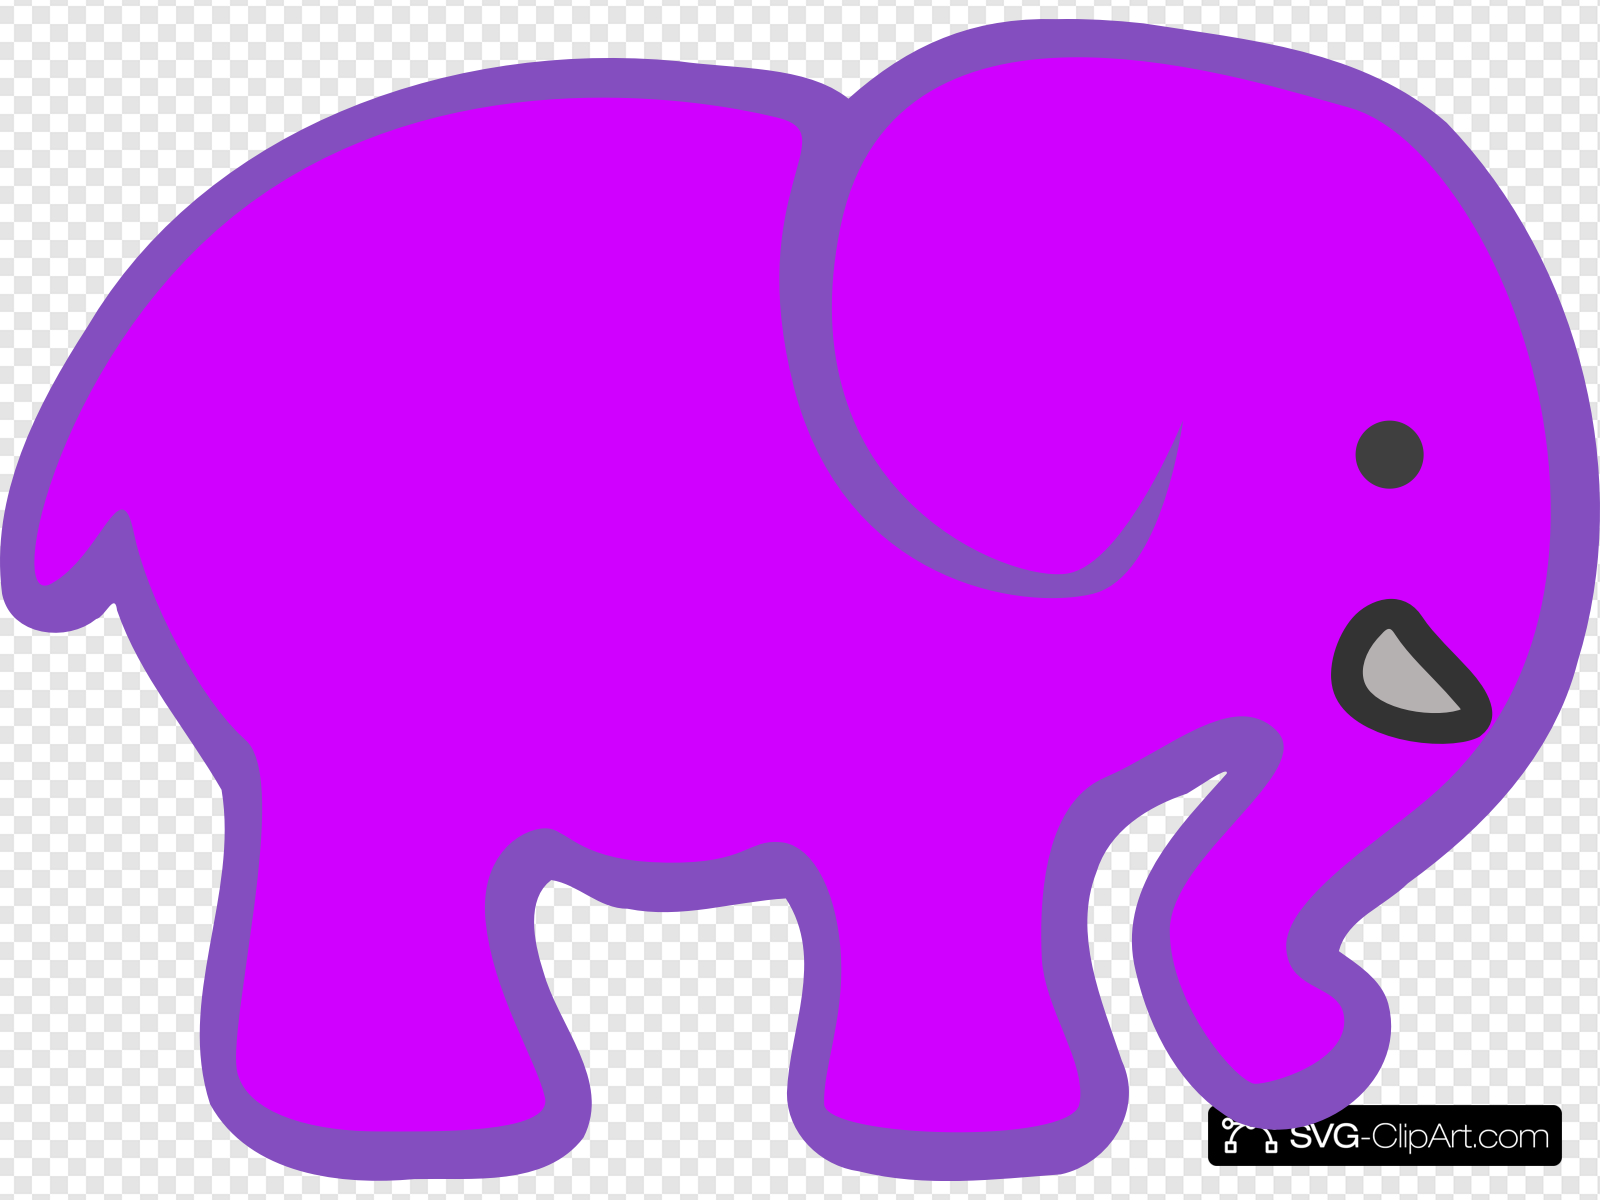 Invert Purple Pink Elephant Clip art, Icon and SVG